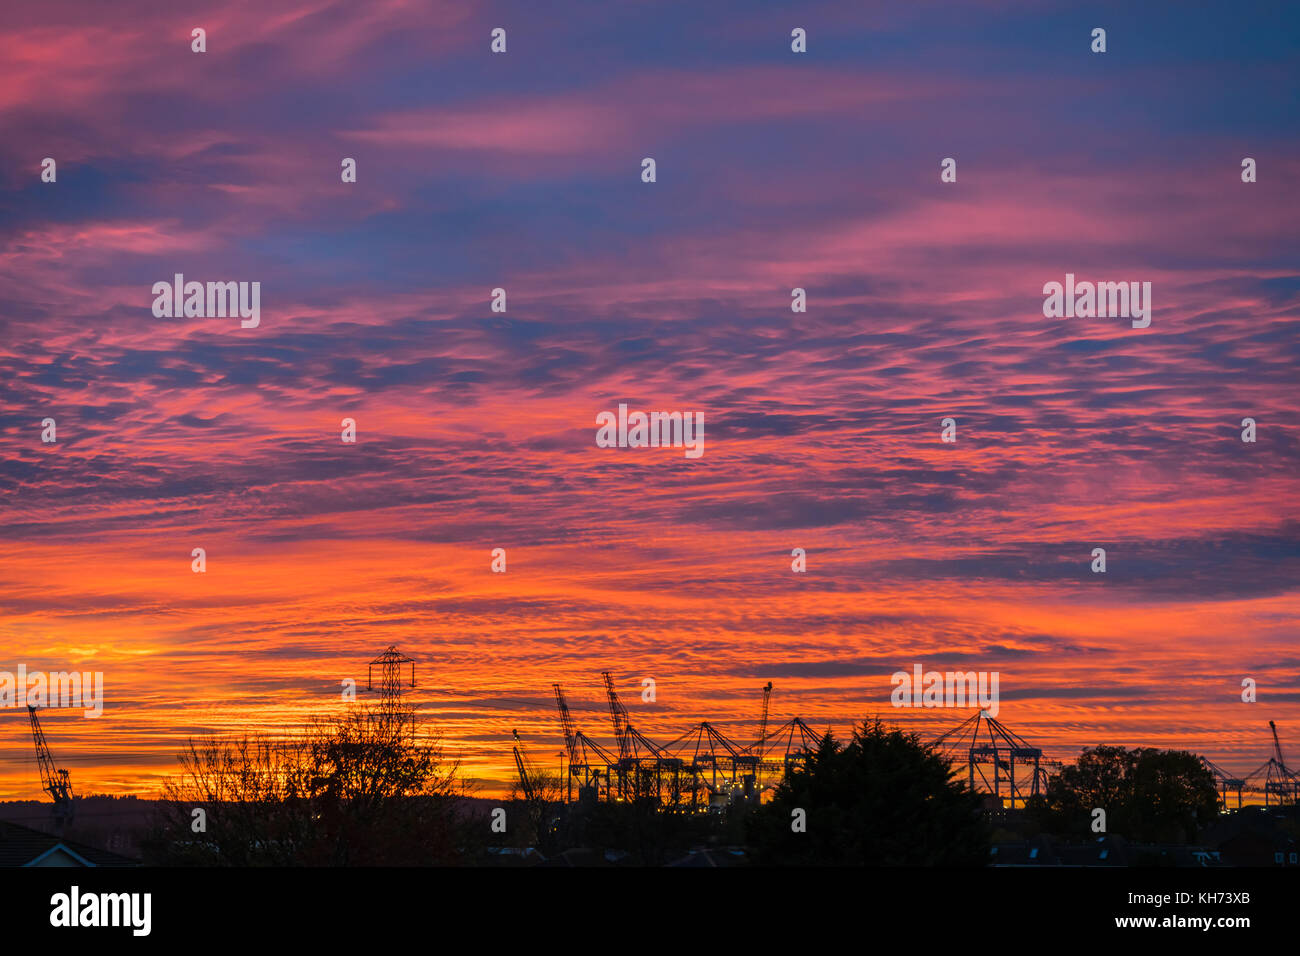 Spectacular colourful and vibrant sunset and evening sky over the docks of Southampton, England, UK Stock Photo